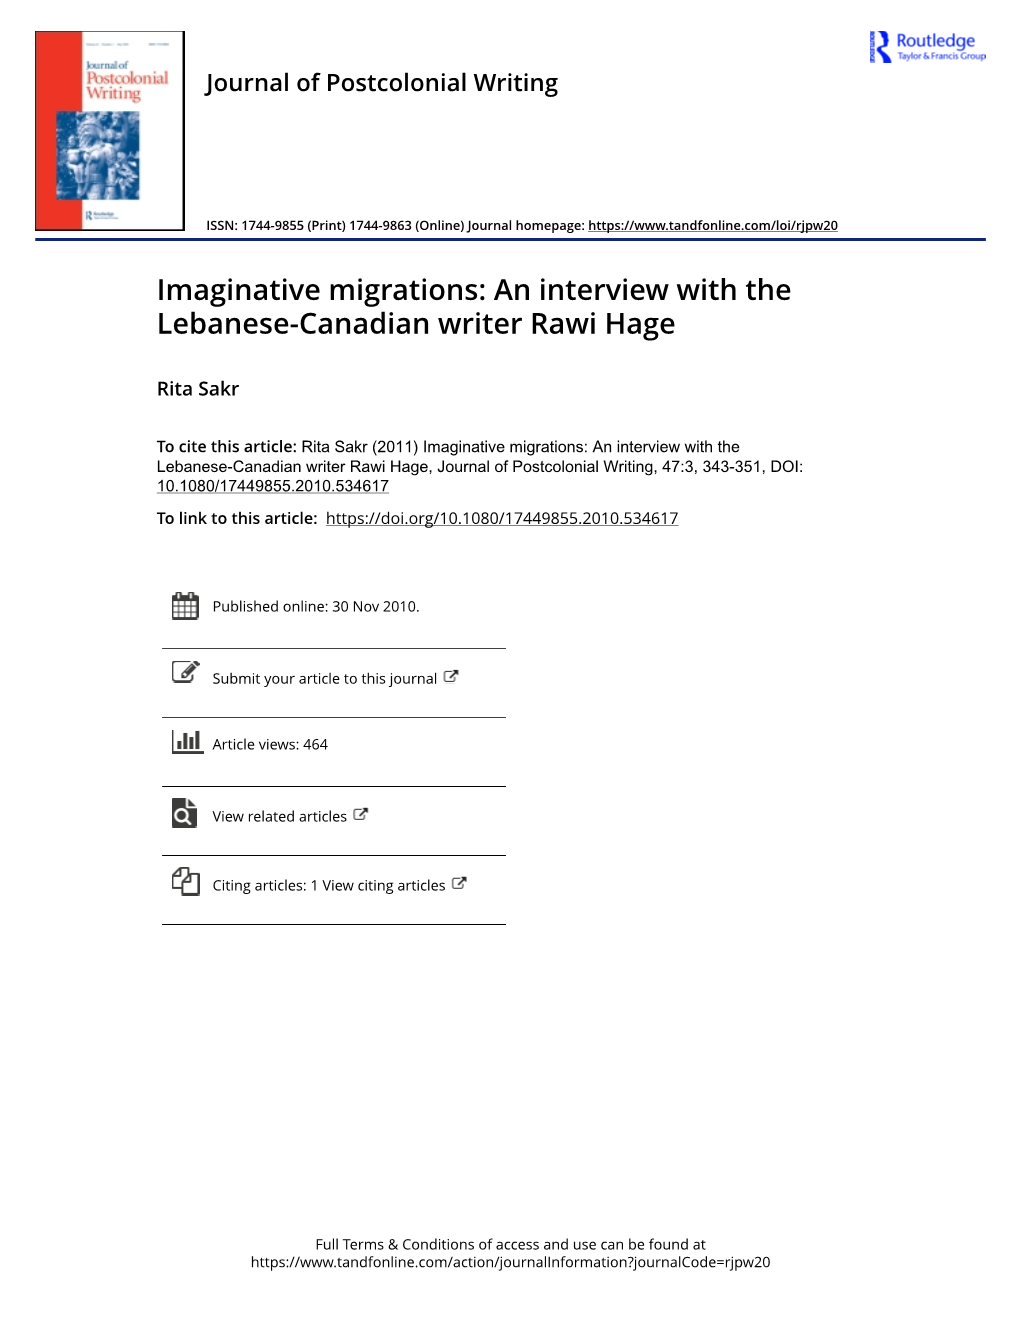 Imaginative Migrations: an Interview with the Lebanese-Canadian Writer Rawi Hage